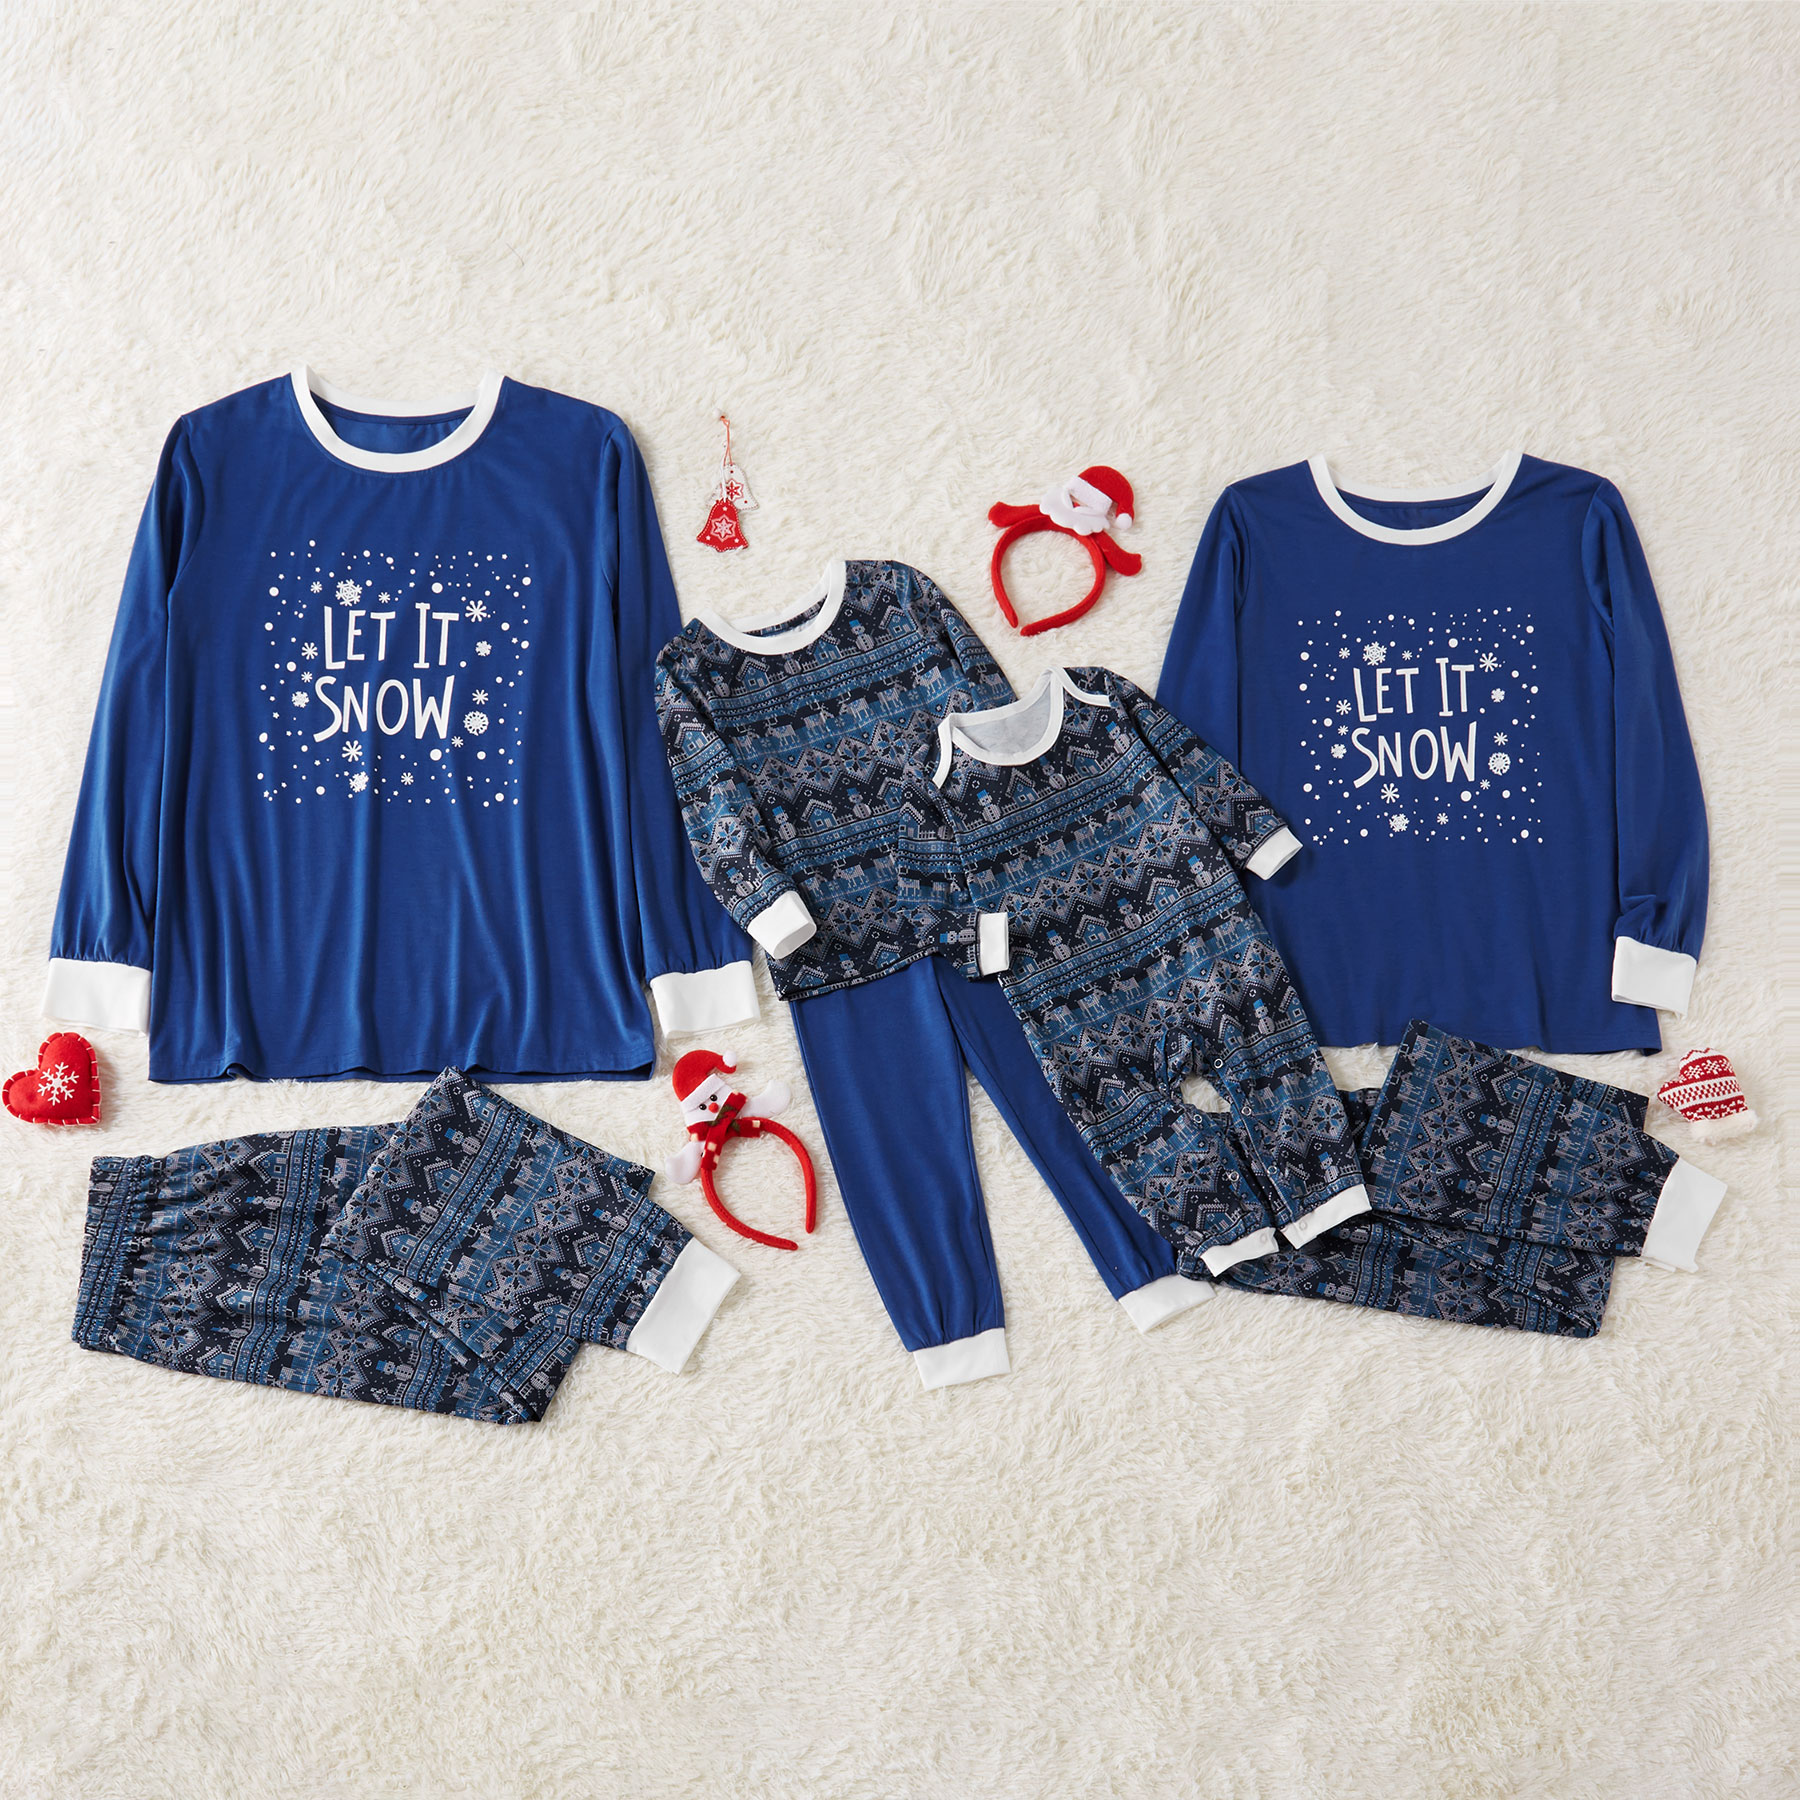 Mosaic Family Matching Let It Snow Top and Pants Pajamas Set for Dad - Mom - Kid - Baby